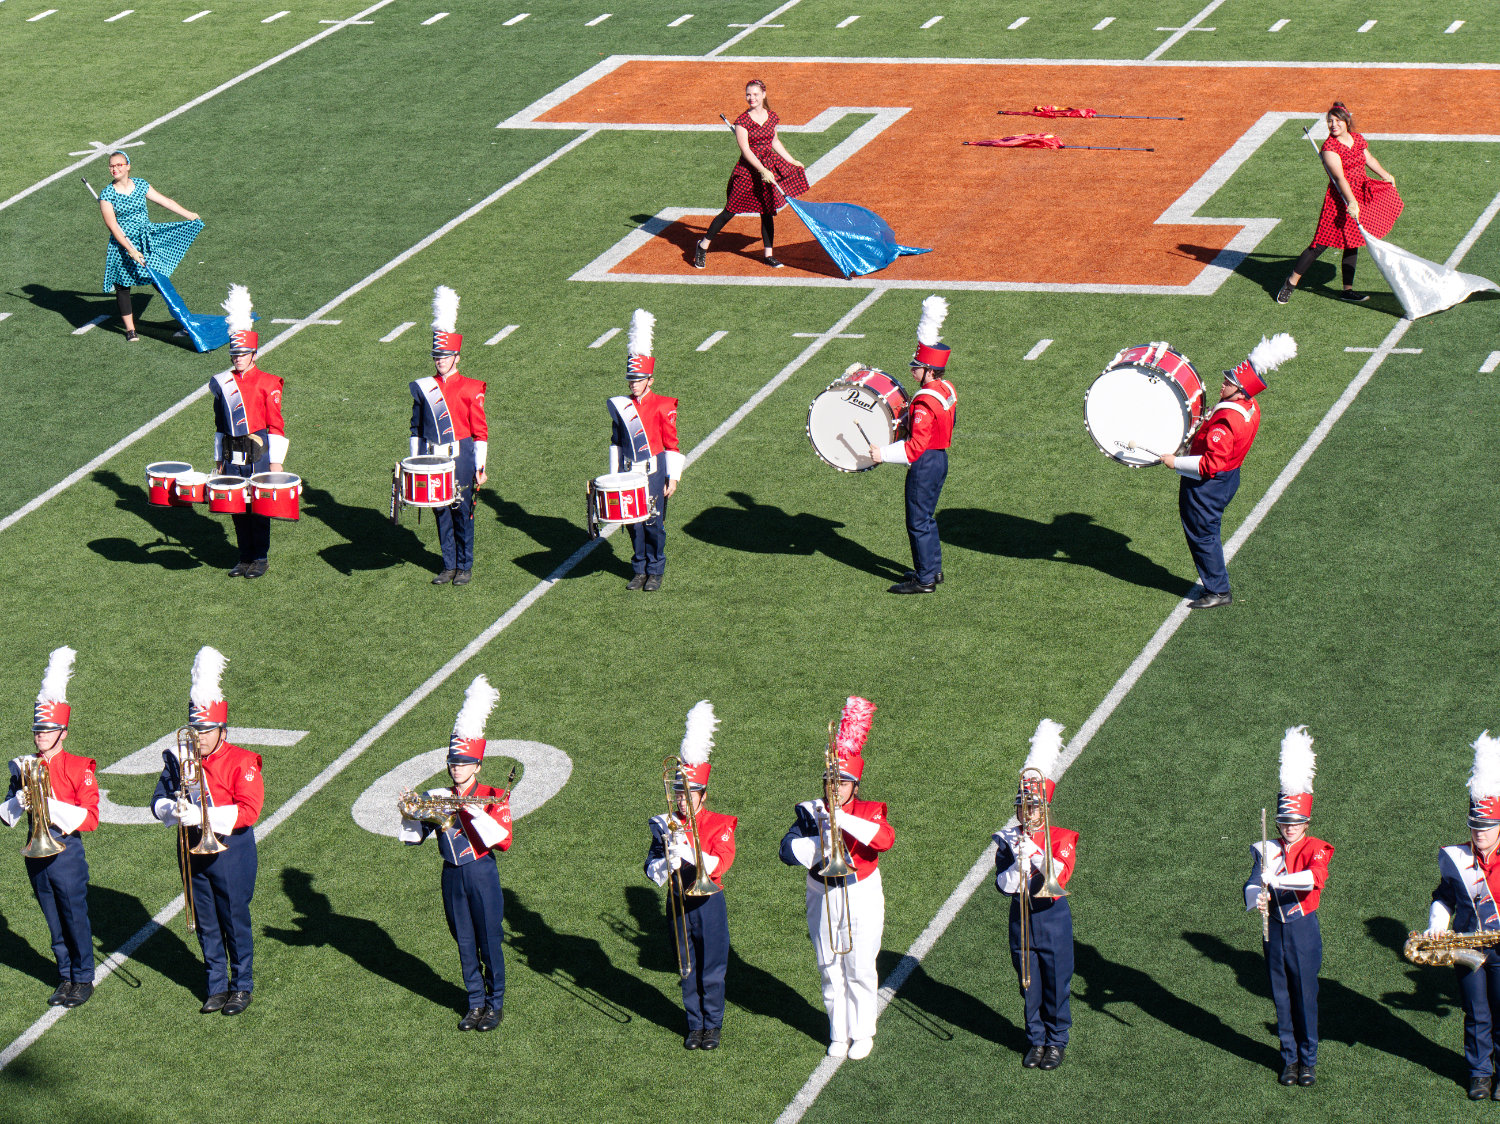 Colorguard, drumline, and brass musicians of the Alba-Golden marching band compete at the class 3A region 4 marching band competition in Texarkana on Friday.